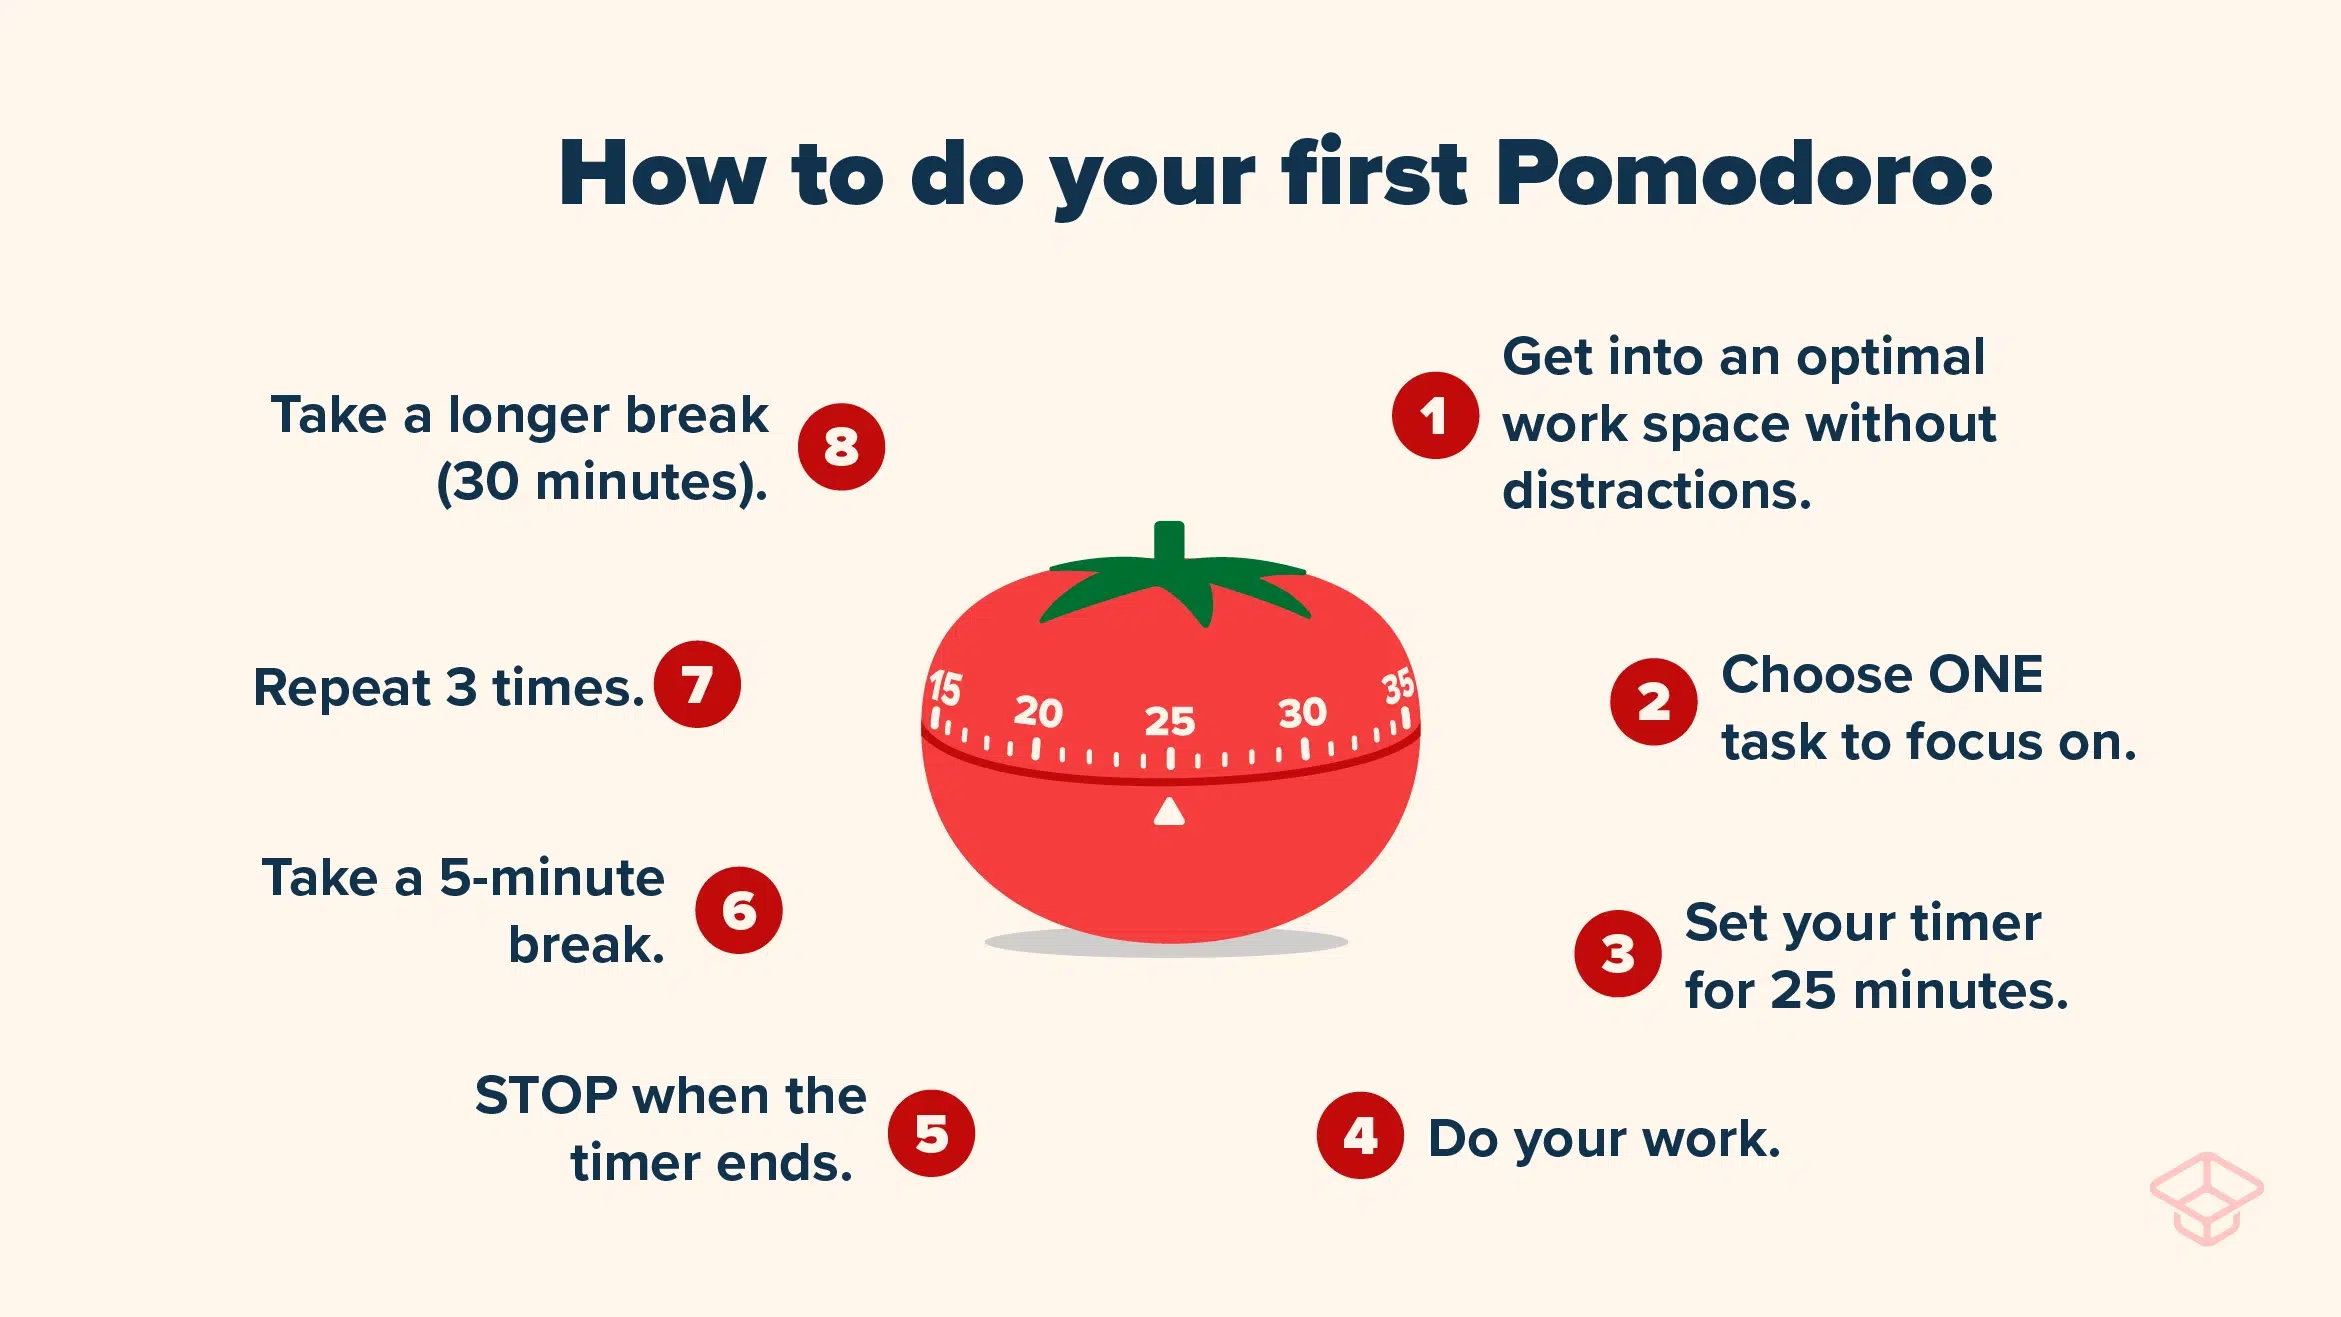 How to do your first pomodoro